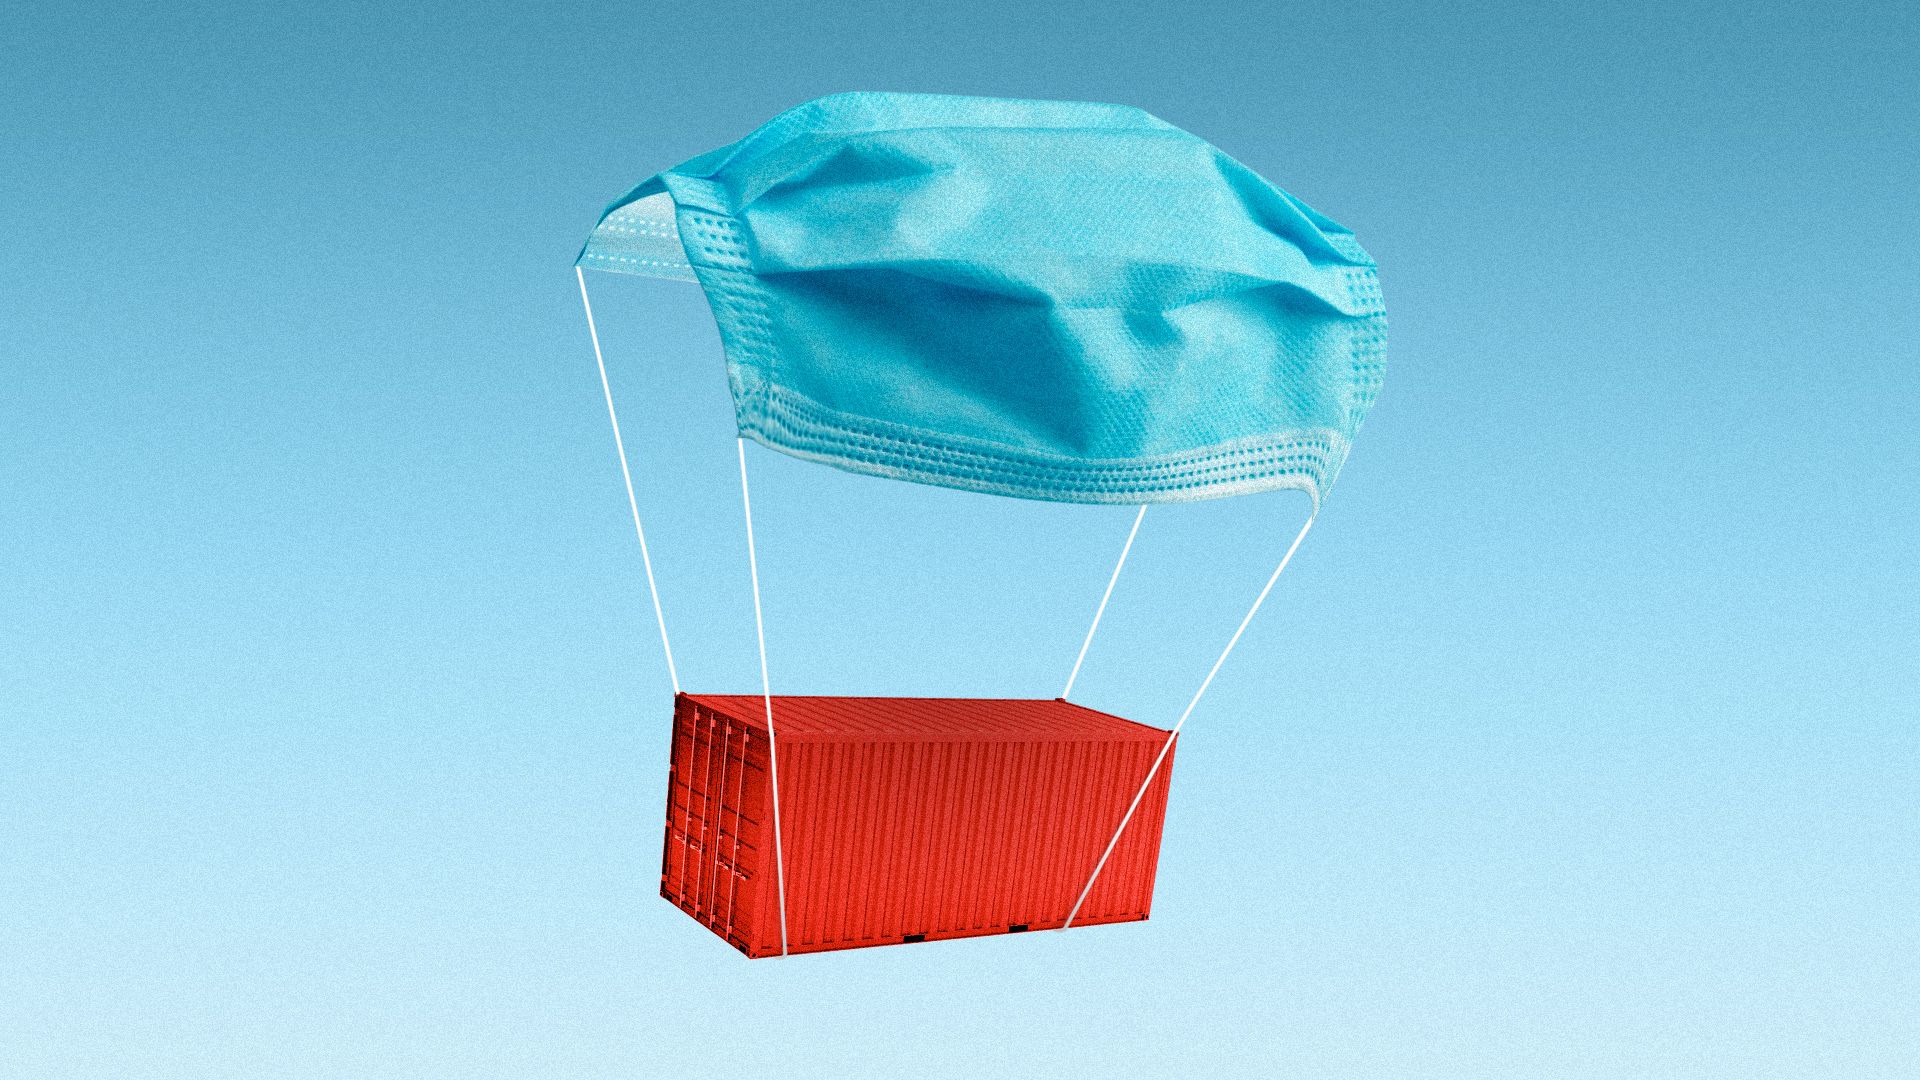 Illustration of a shipping container with a surgical mask as a parachute.